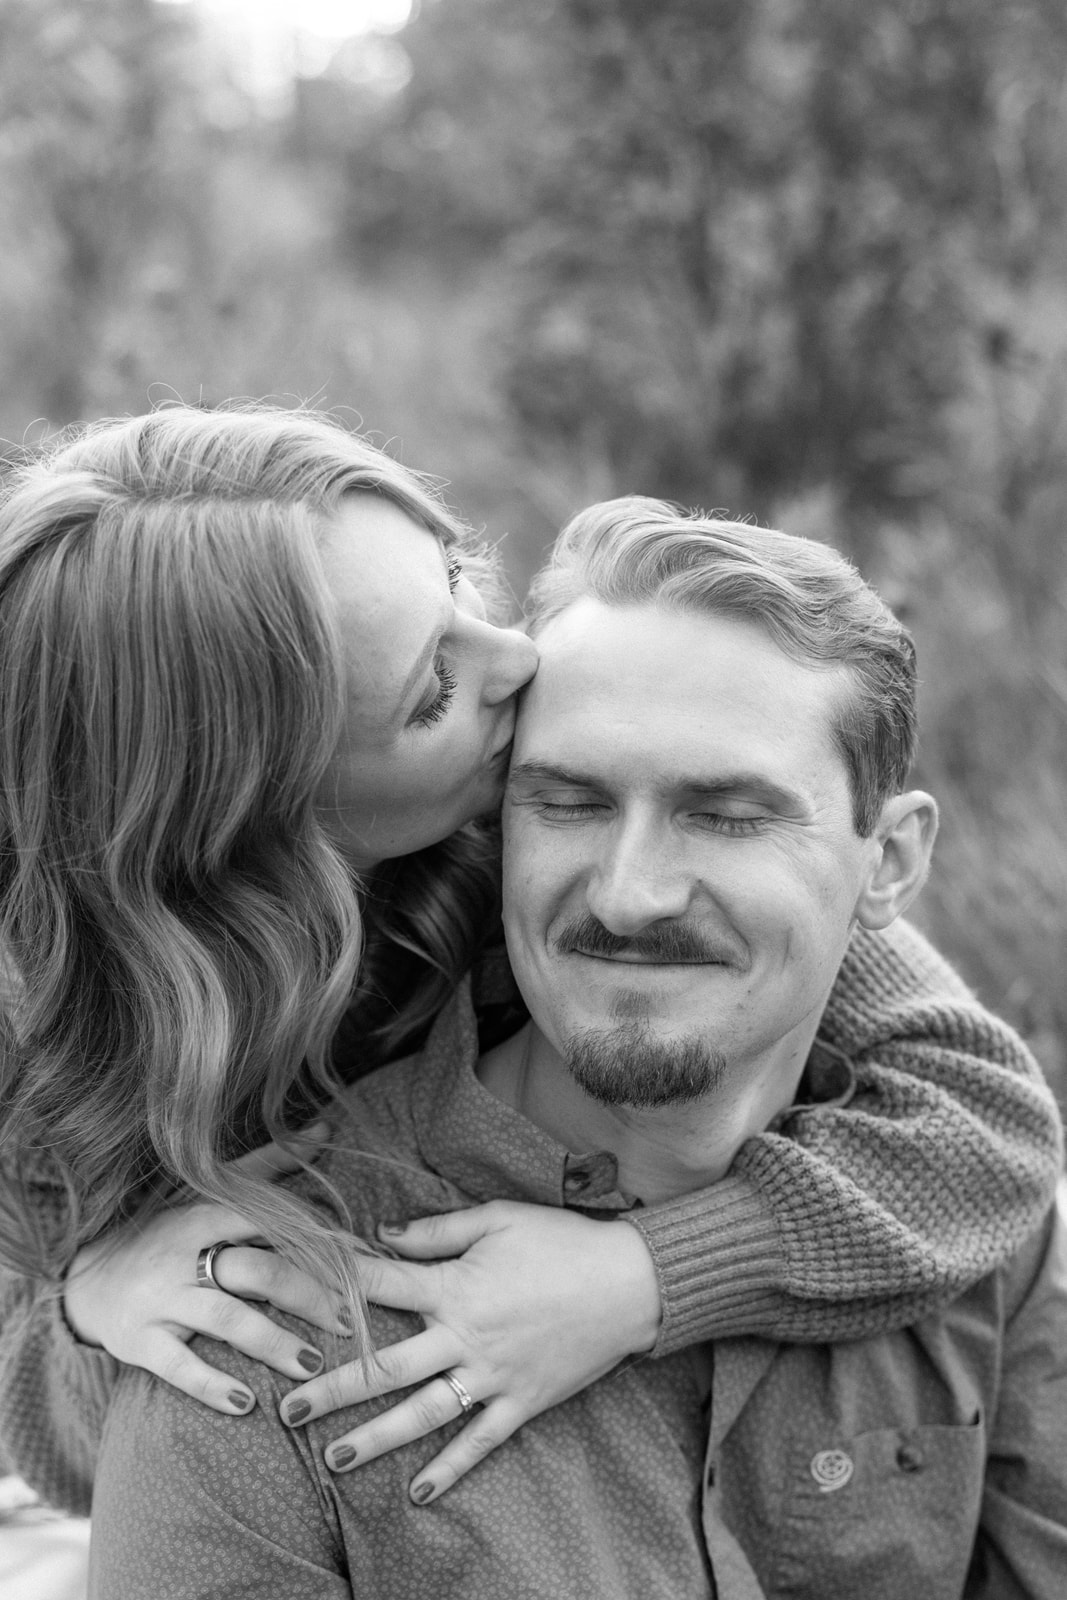 Couples photography in Rapid City, SD